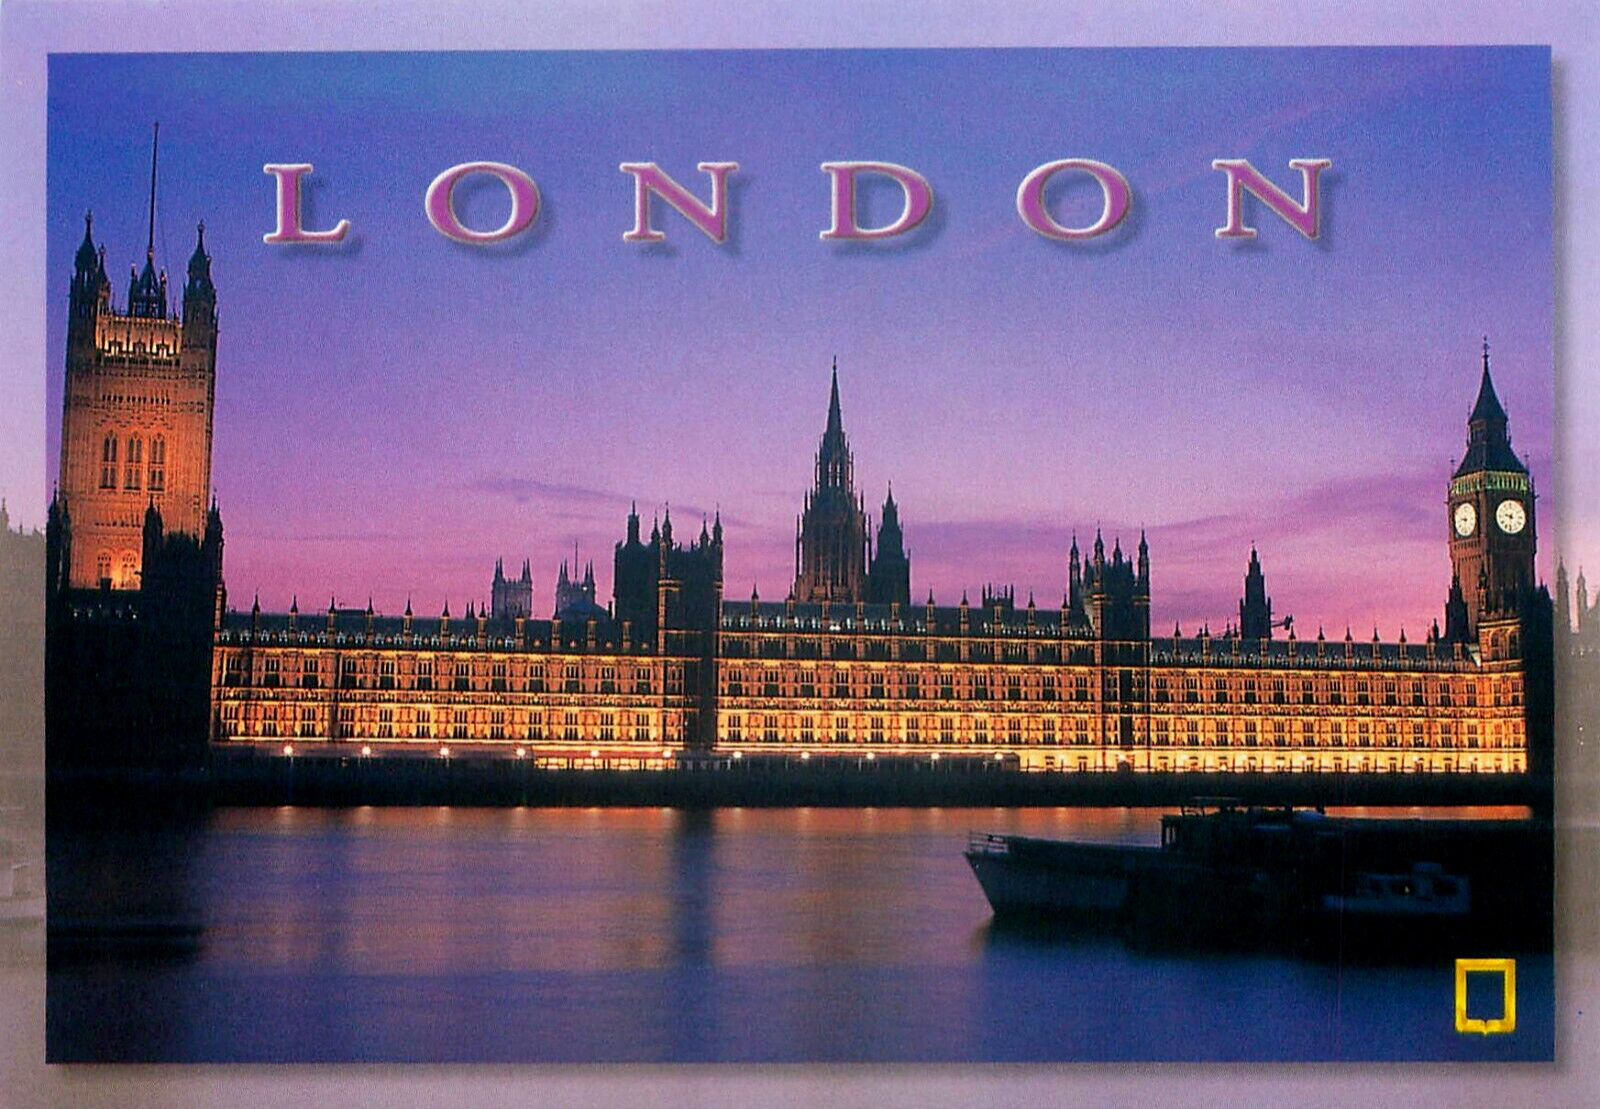 Parliament and Big Ben Night View London England Unposted Postcard